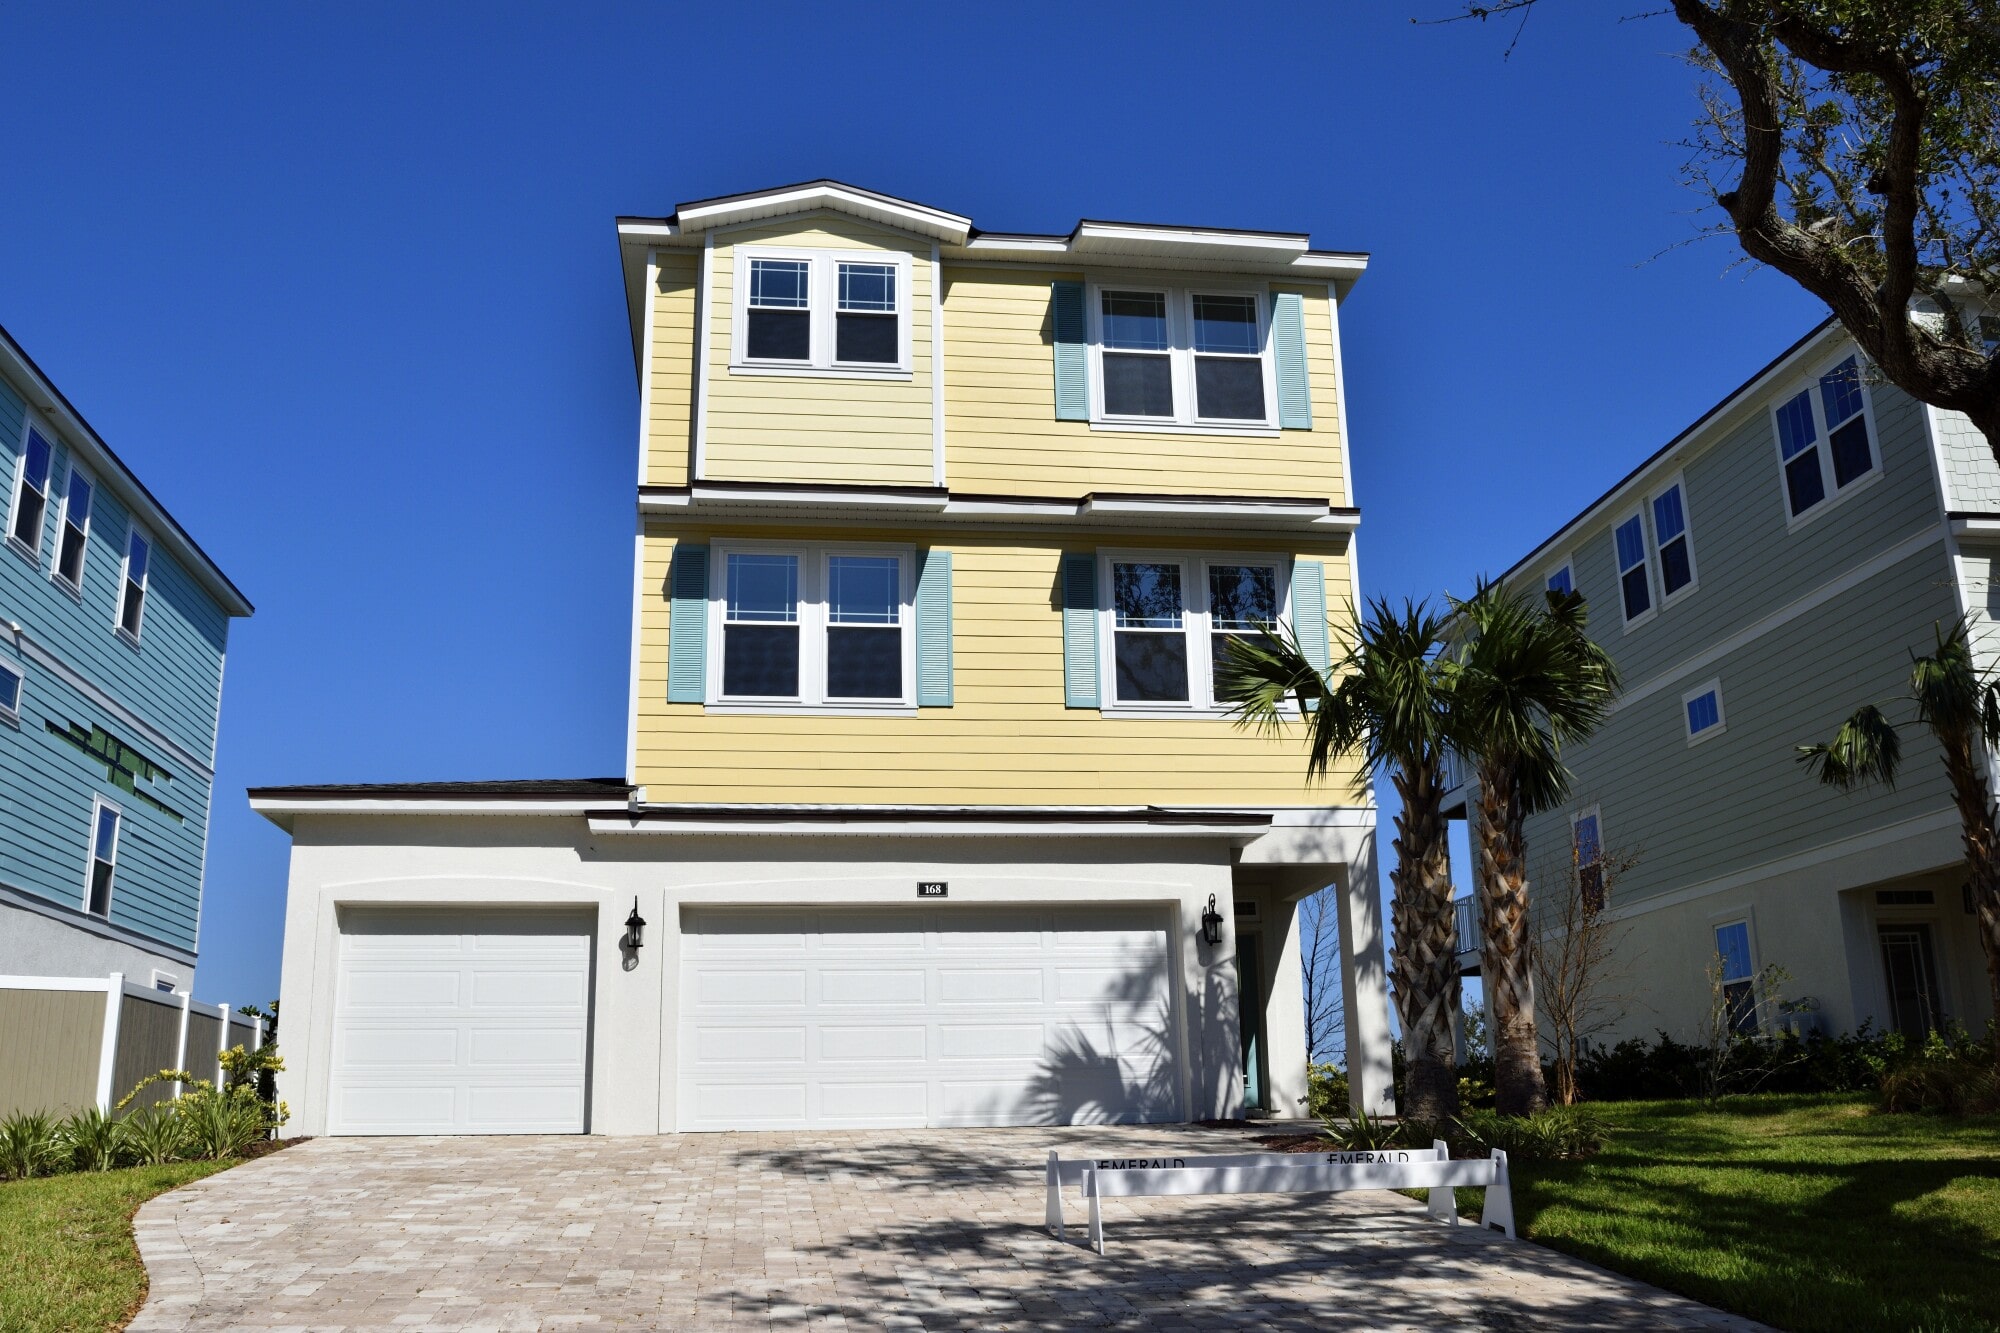 Accidental Landlords in Daytona Beach: 5 Facts to Know